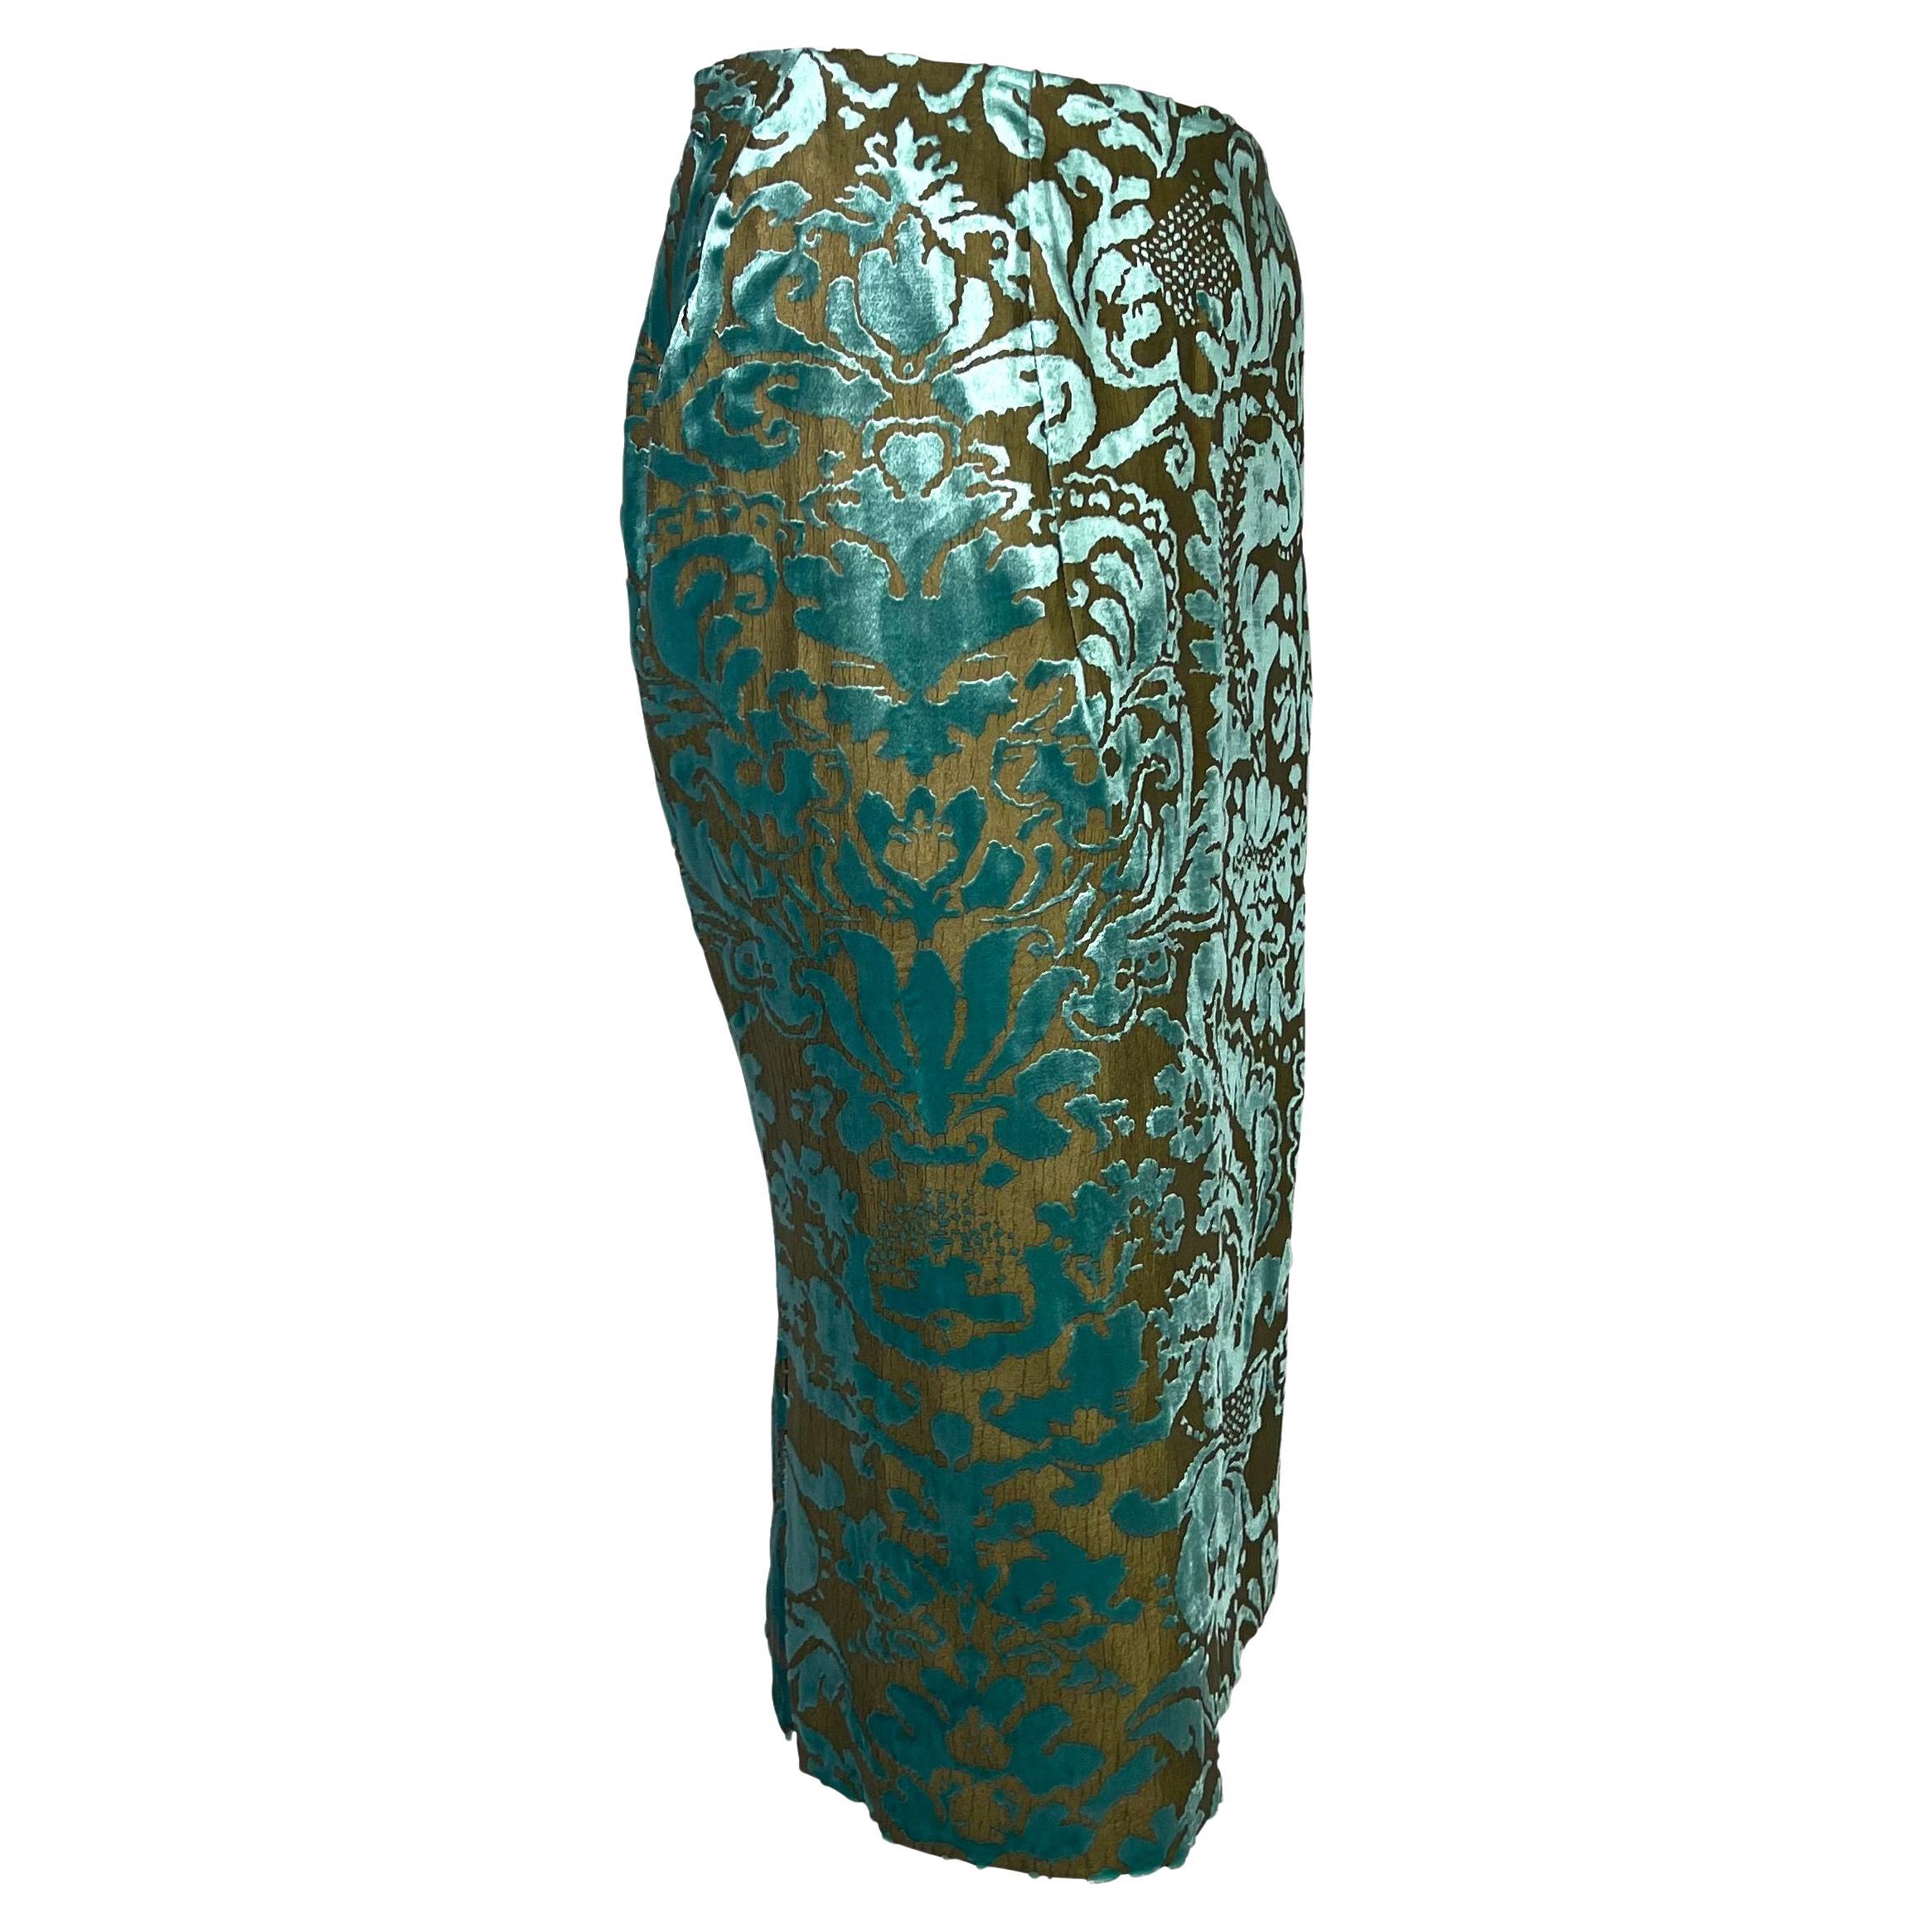 Women's S/S 2000 Gucci by Tom Ford Floral Bronze Painted Teal Velvet Skirt Sample For Sale